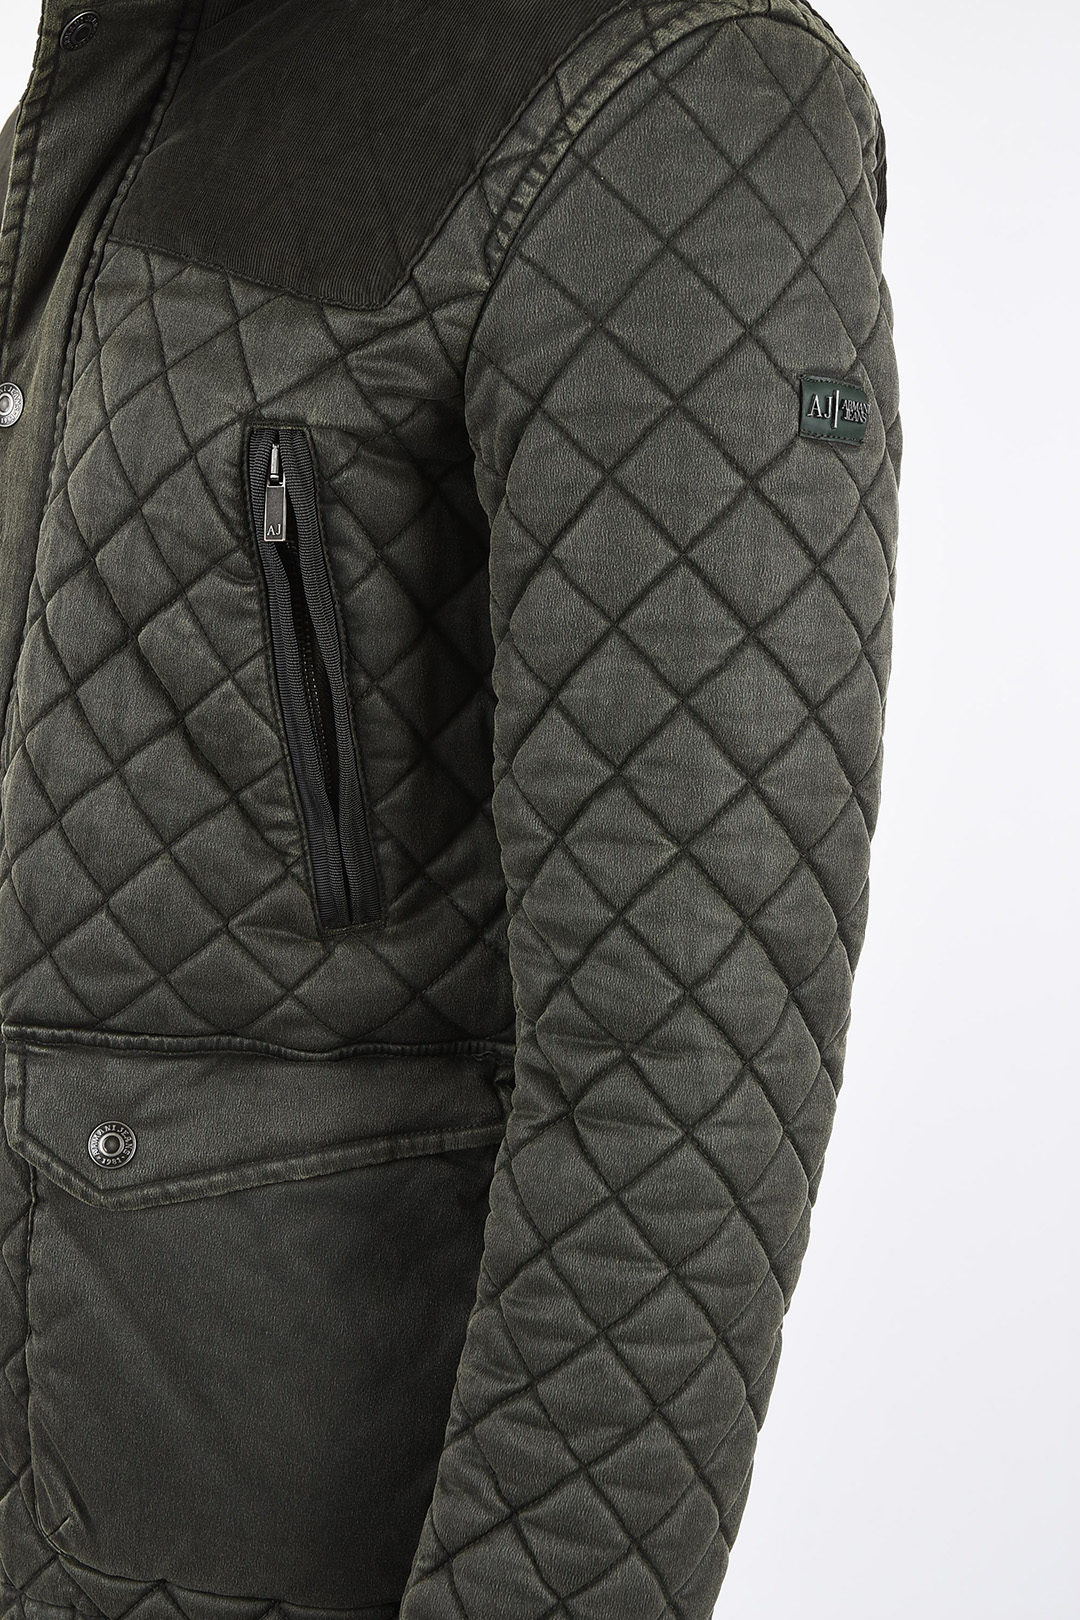 Armani ARMANI JEANS hooded quilted jacket men - Glamood Outlet